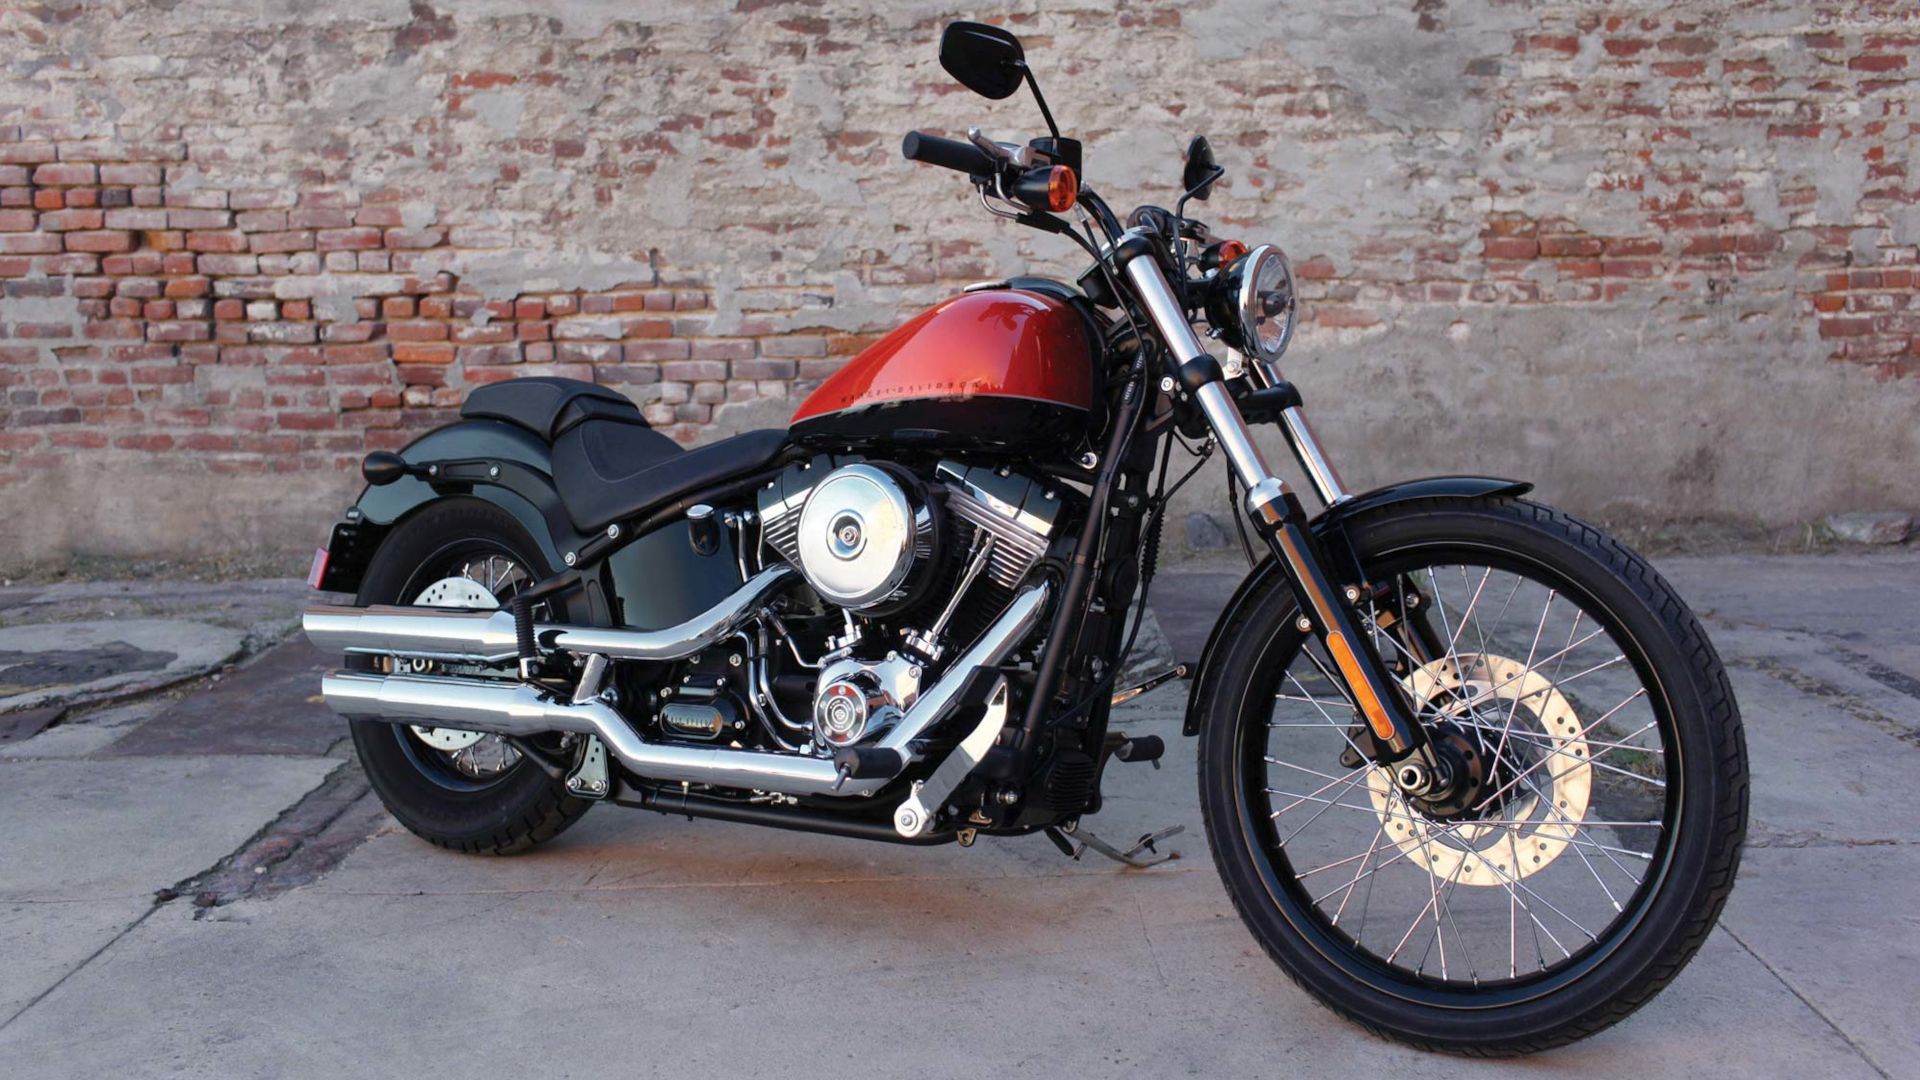 Discontinued Harley-Davidson Models That Need To Be Revived